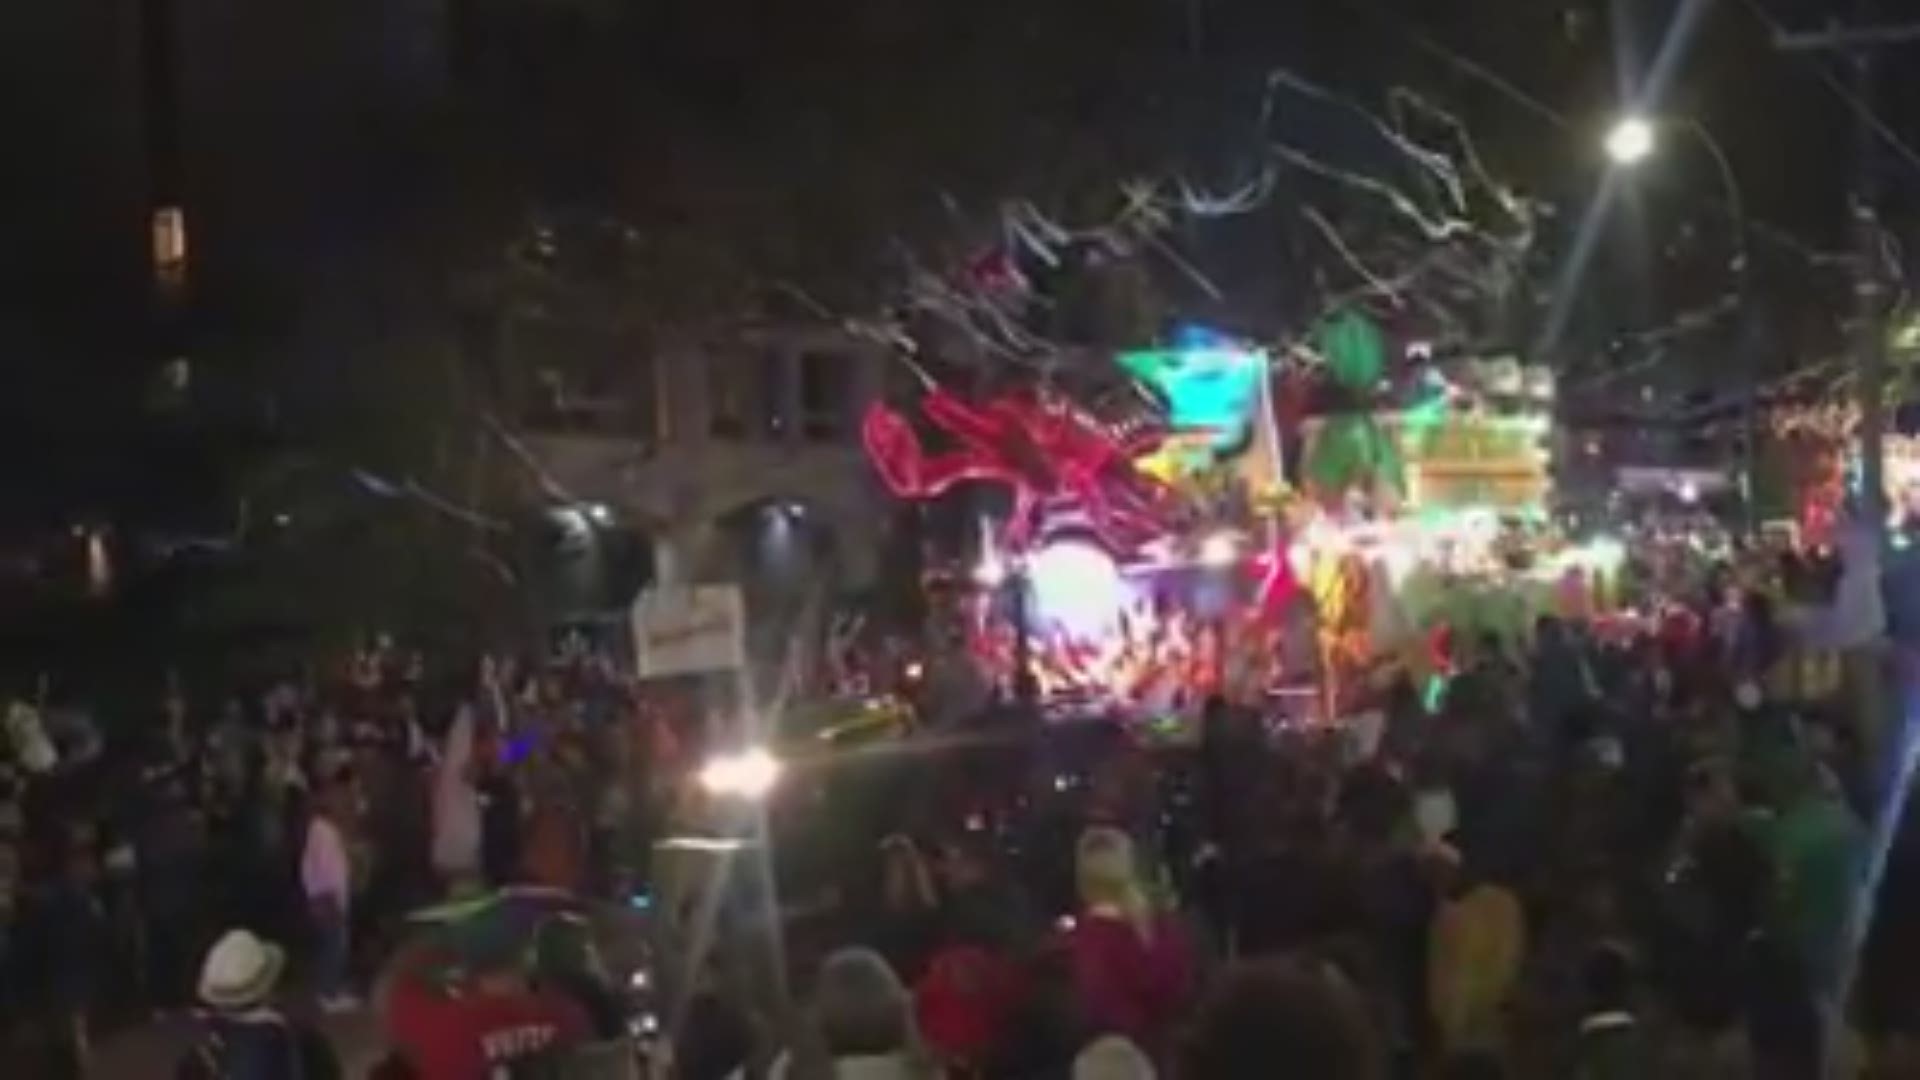 The Krewe of Bacchus and its well-lit floats roll down St. Charles Avenue early Saturday night.